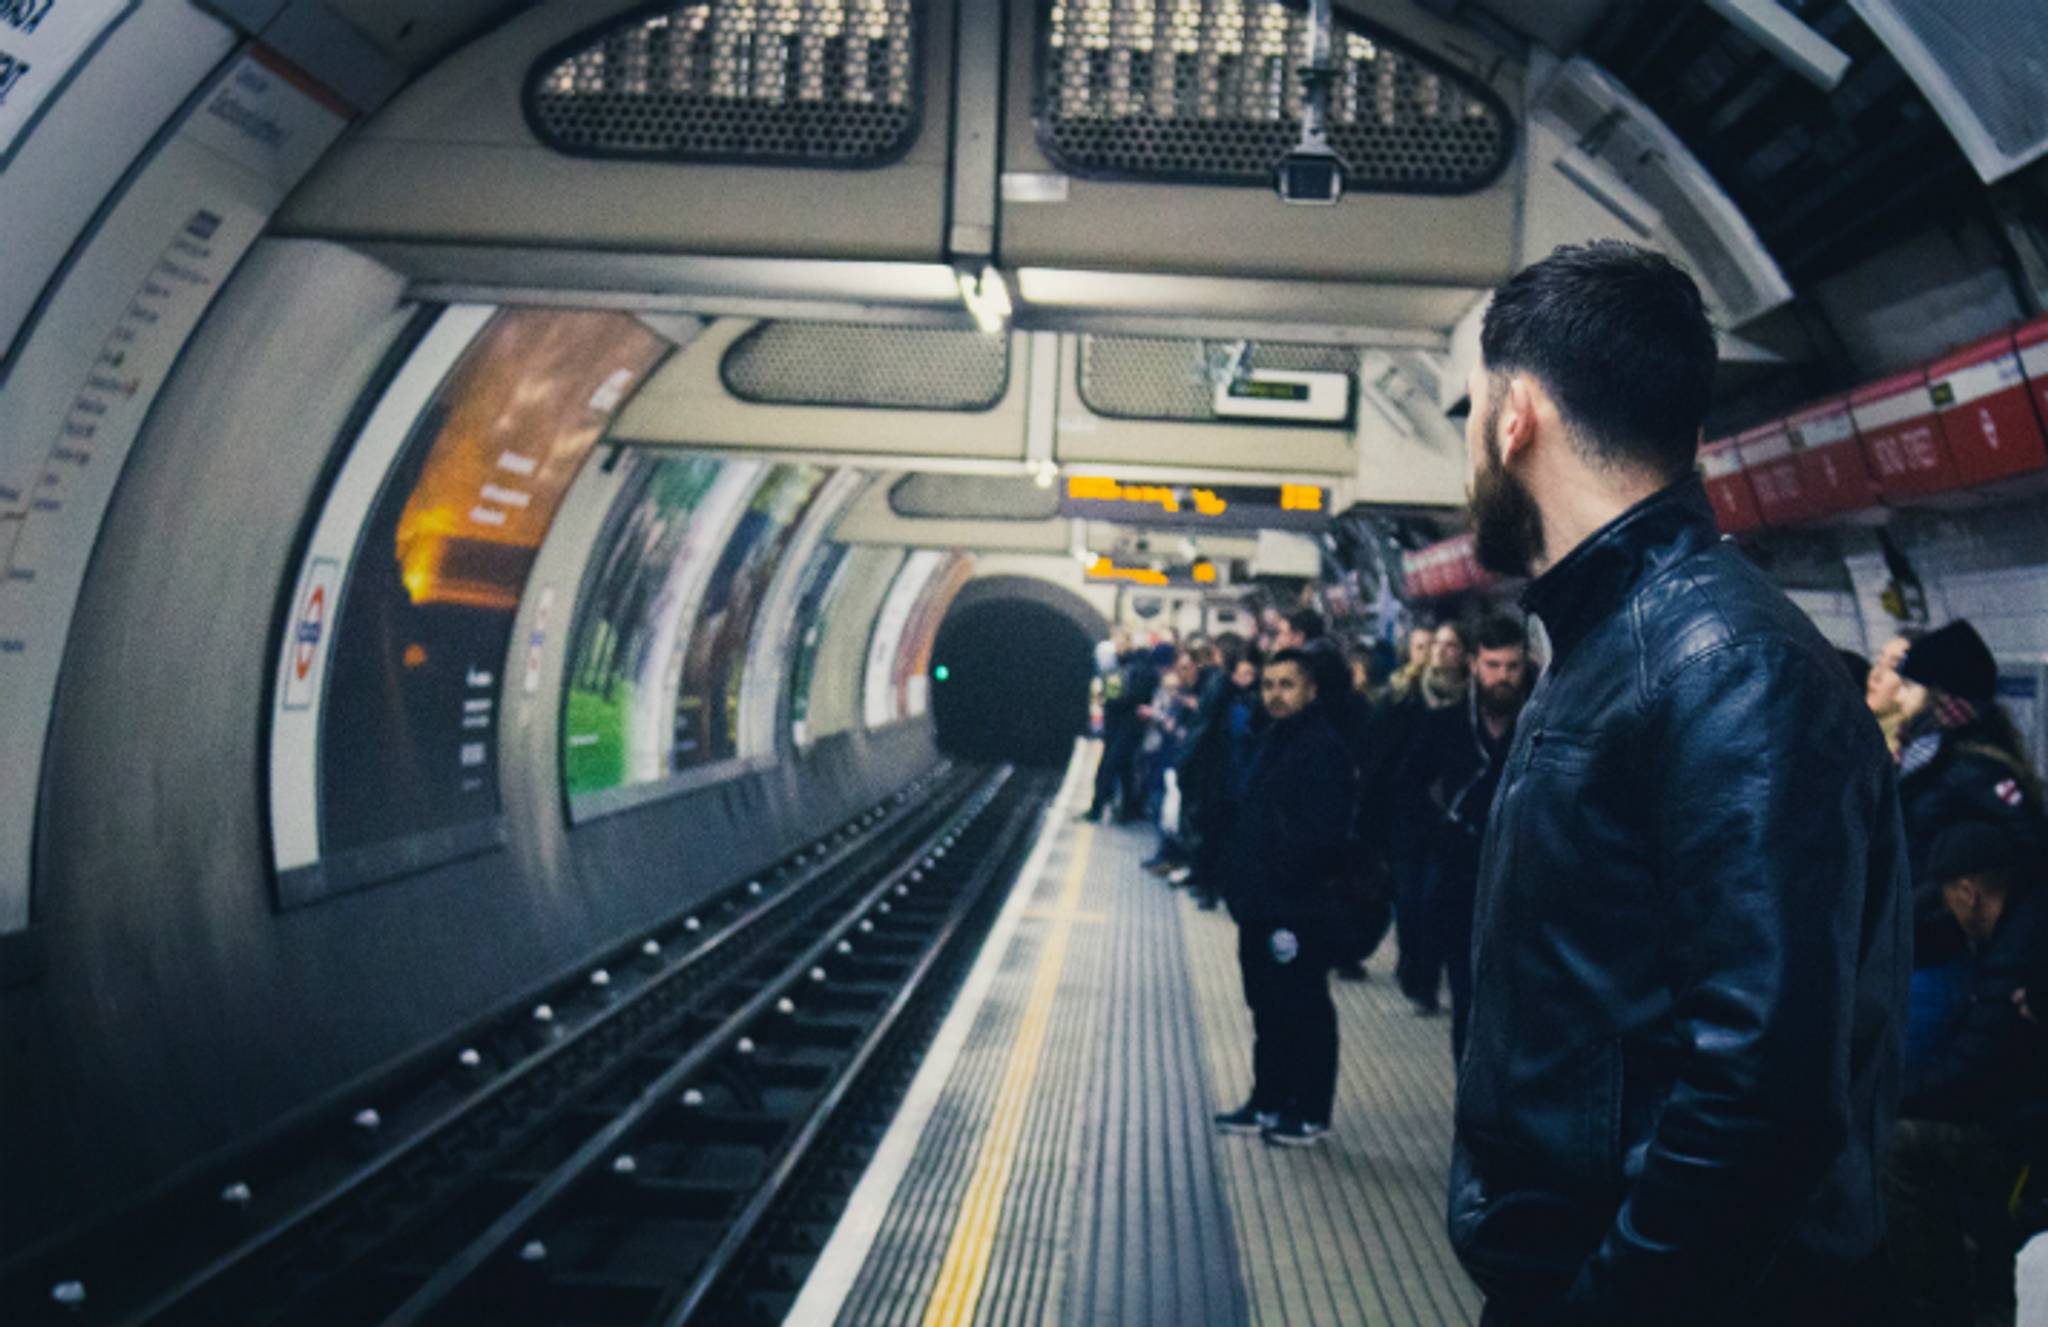 TfL tackles commuting stress with Headspace initiative